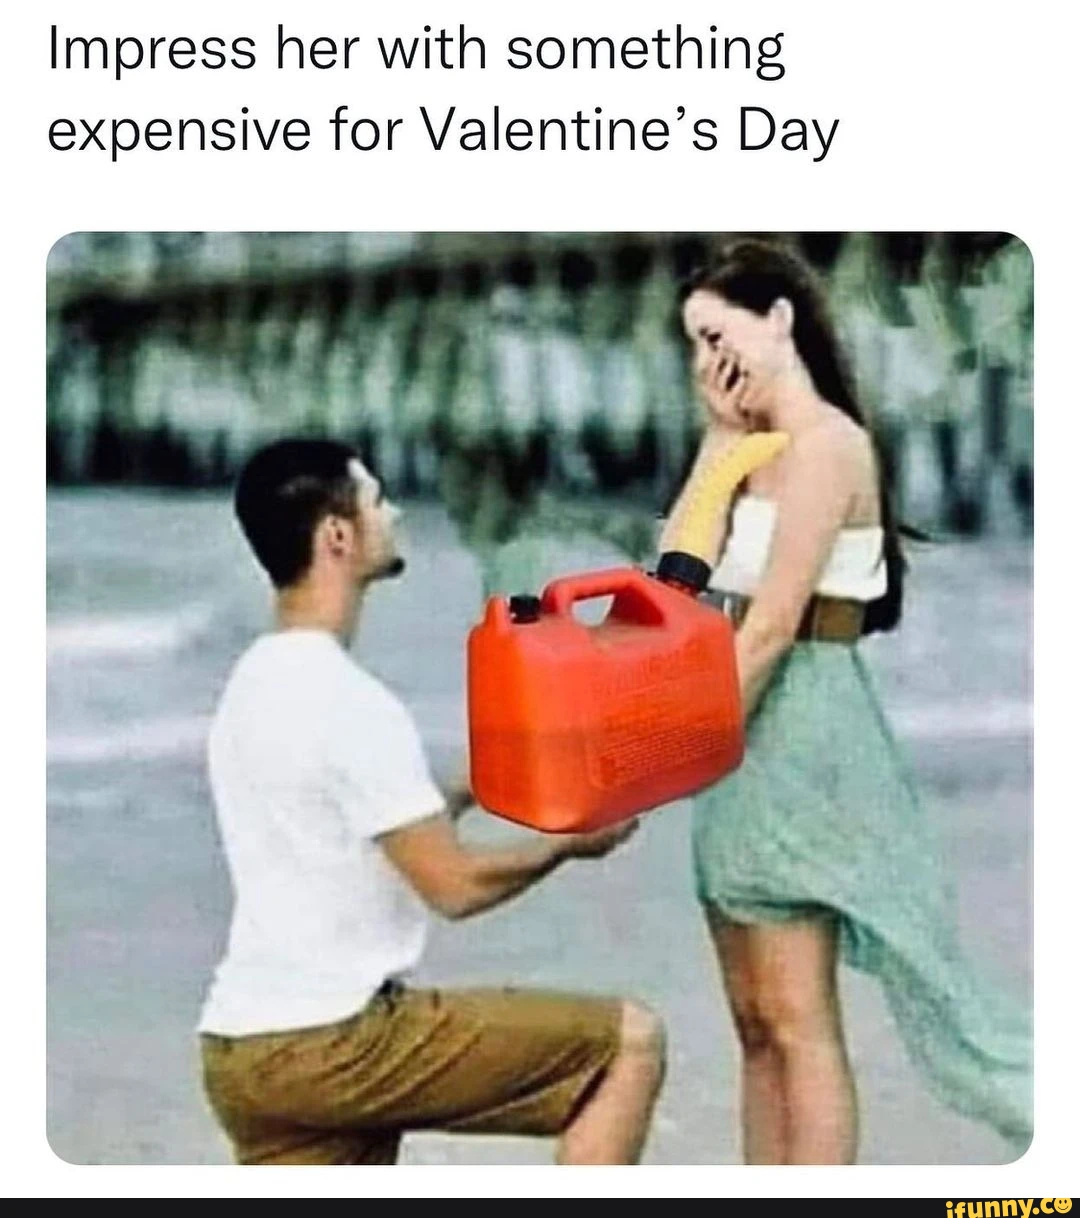 Impress her with something expensive for Valentine's Day